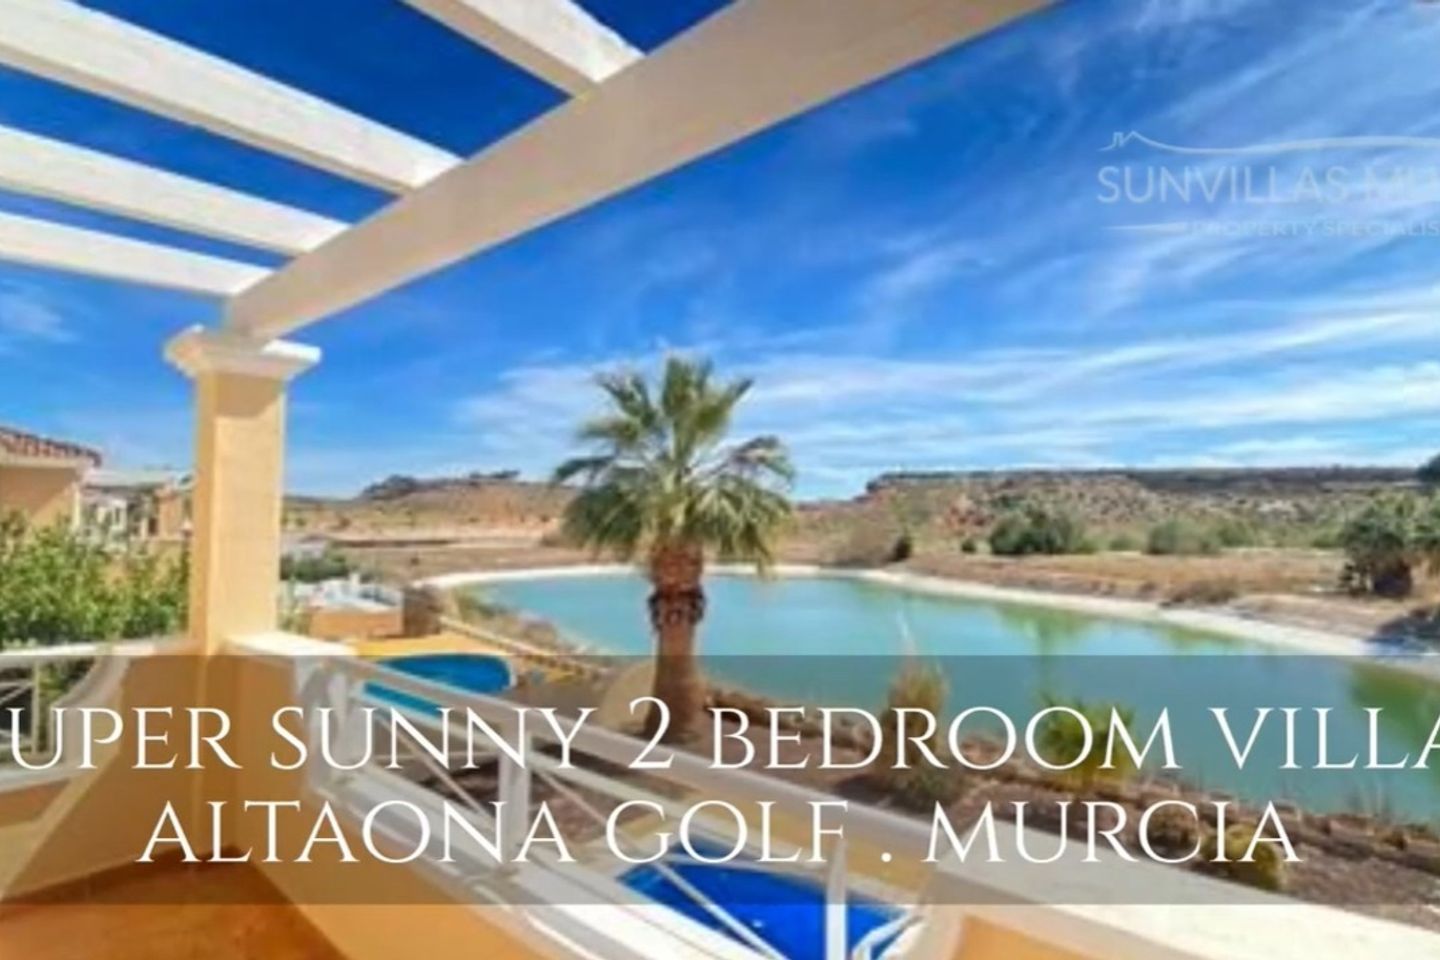 Altaona Golf and Country Village, Murcia Town, Murcia, Spain